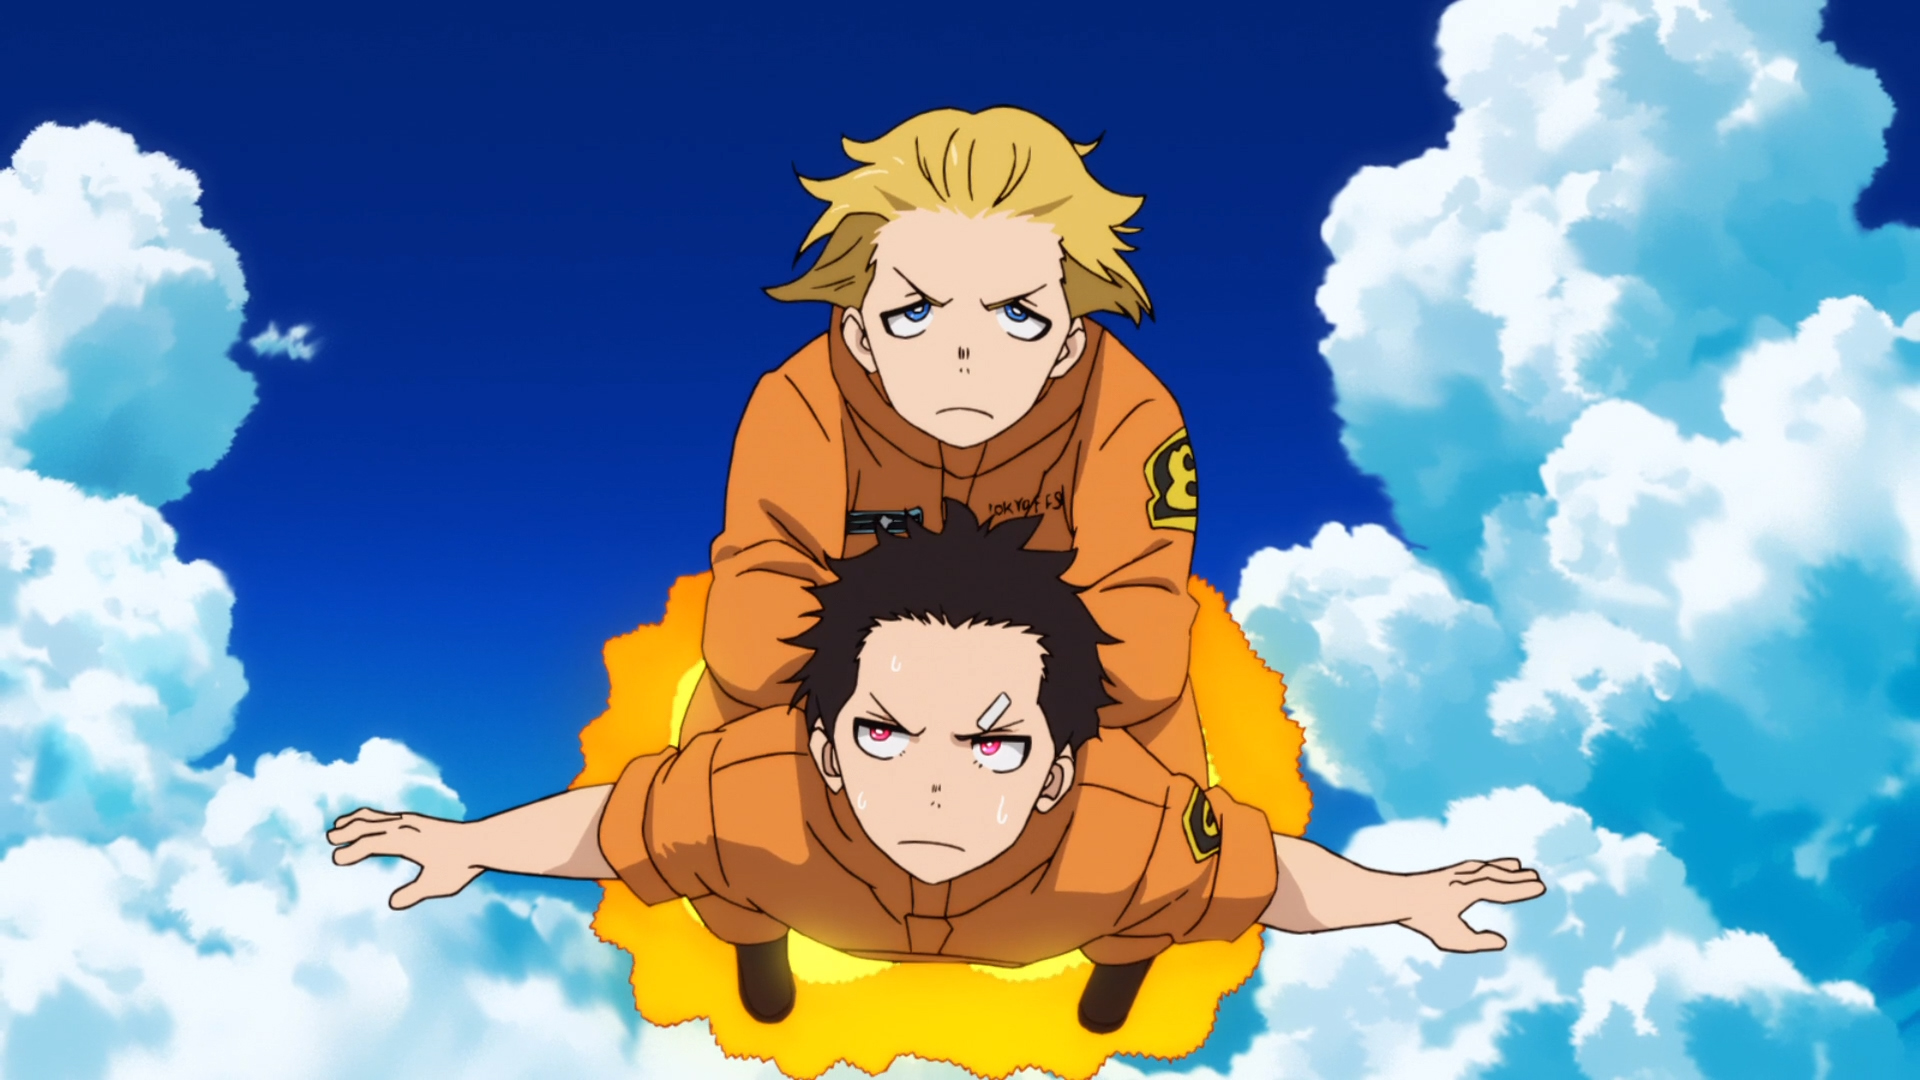 Fire Force Season 1 Part 2 (Anime) Review - STG Play